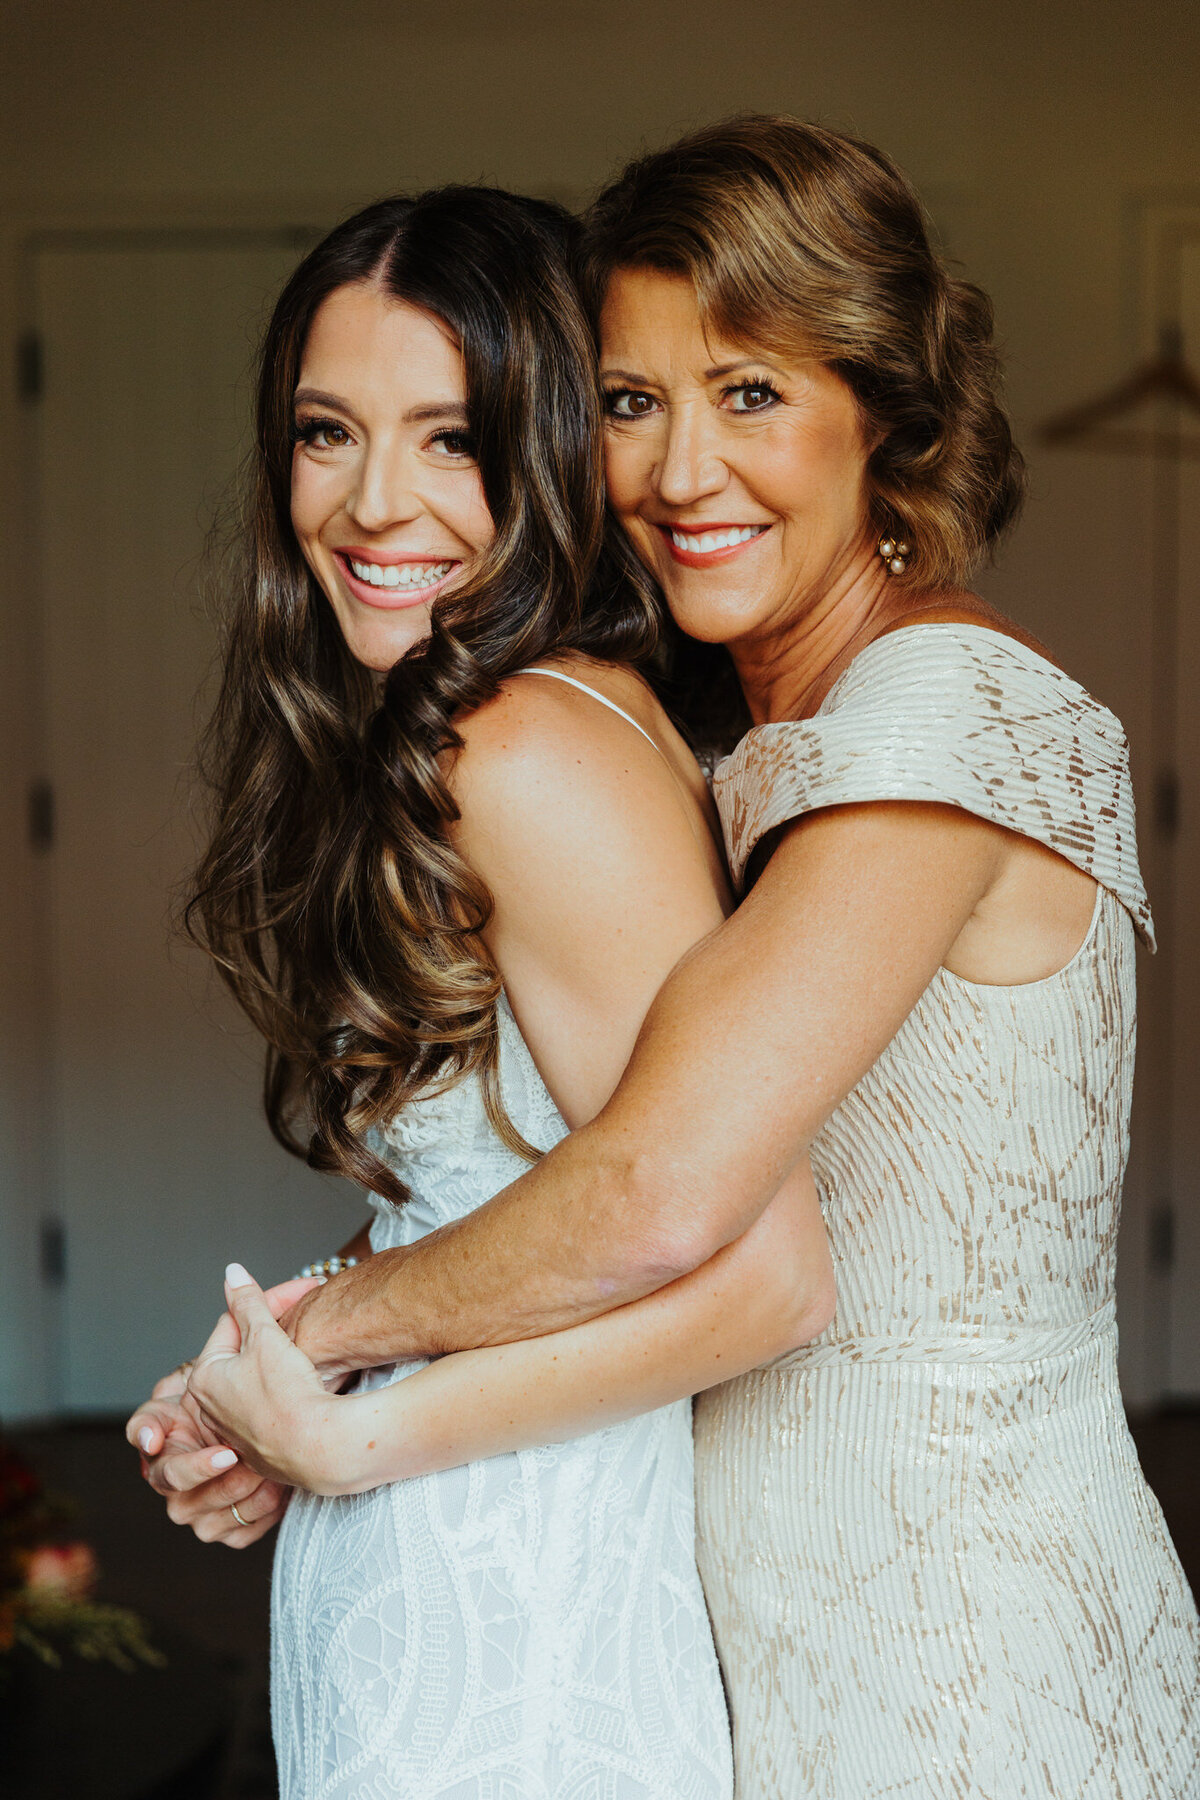 mom and bride embrace on the wedding day